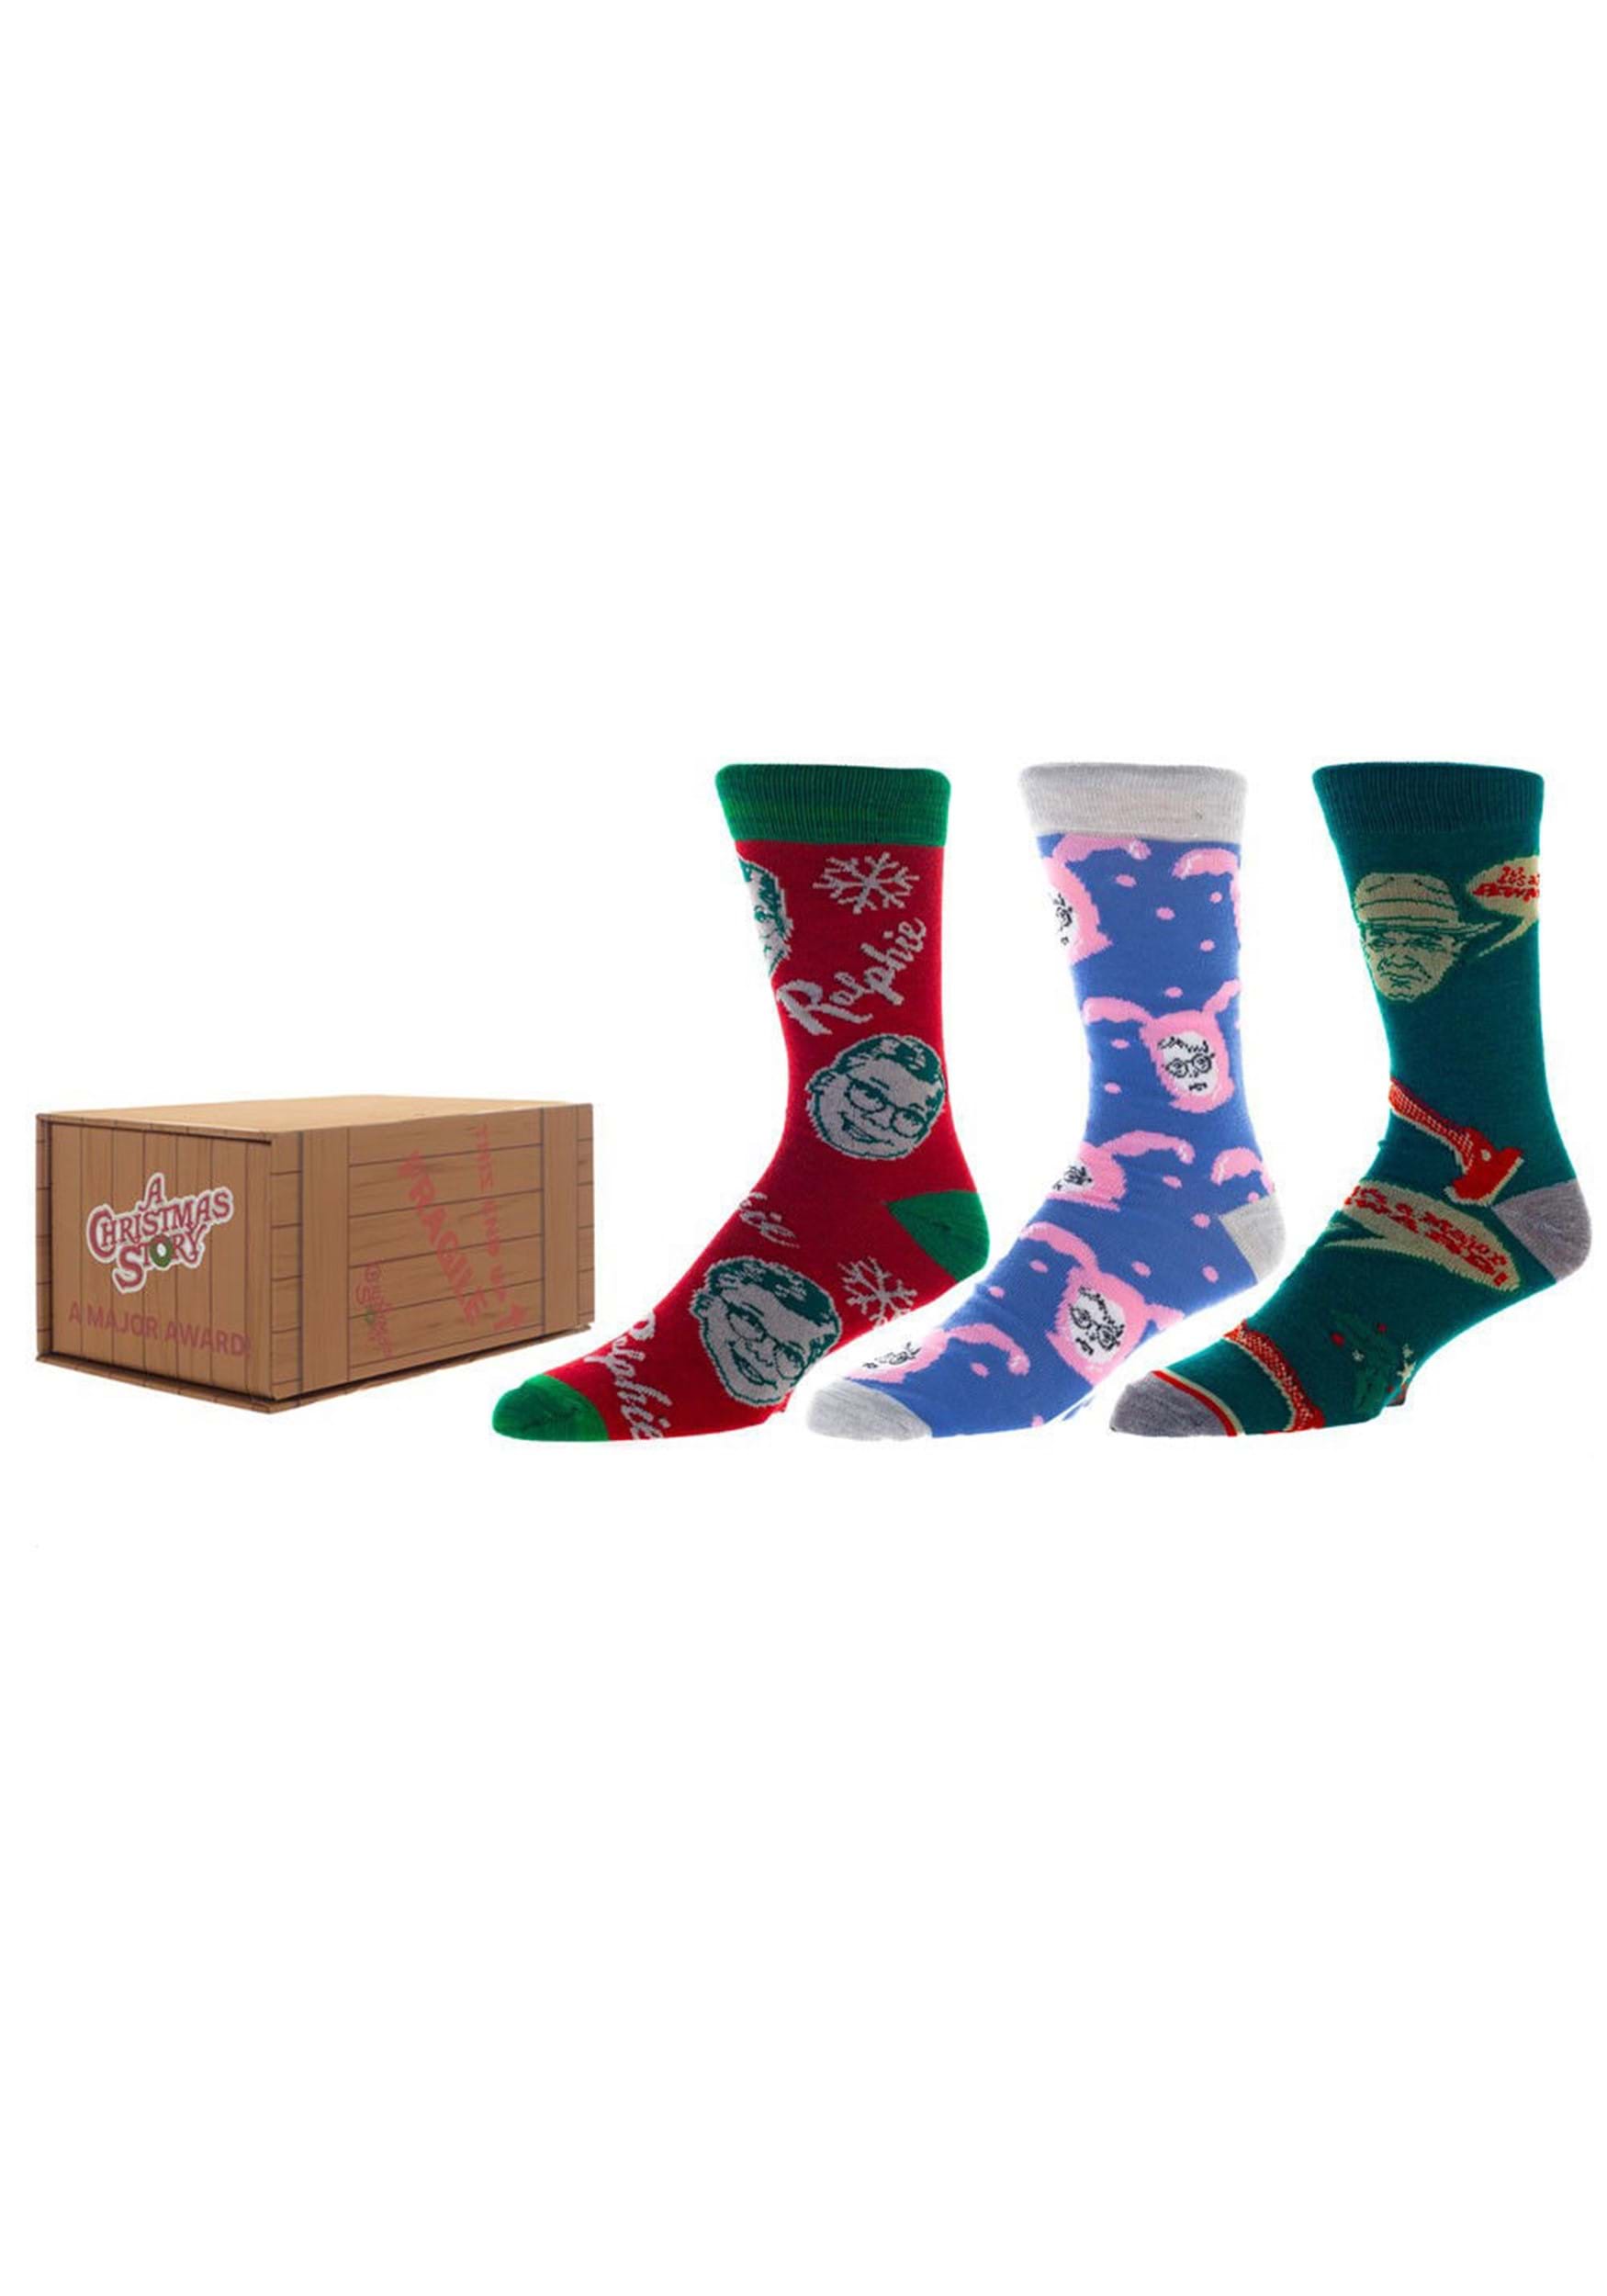 A Christmas Story Pack of 3 Holiday Casual Crew Socks